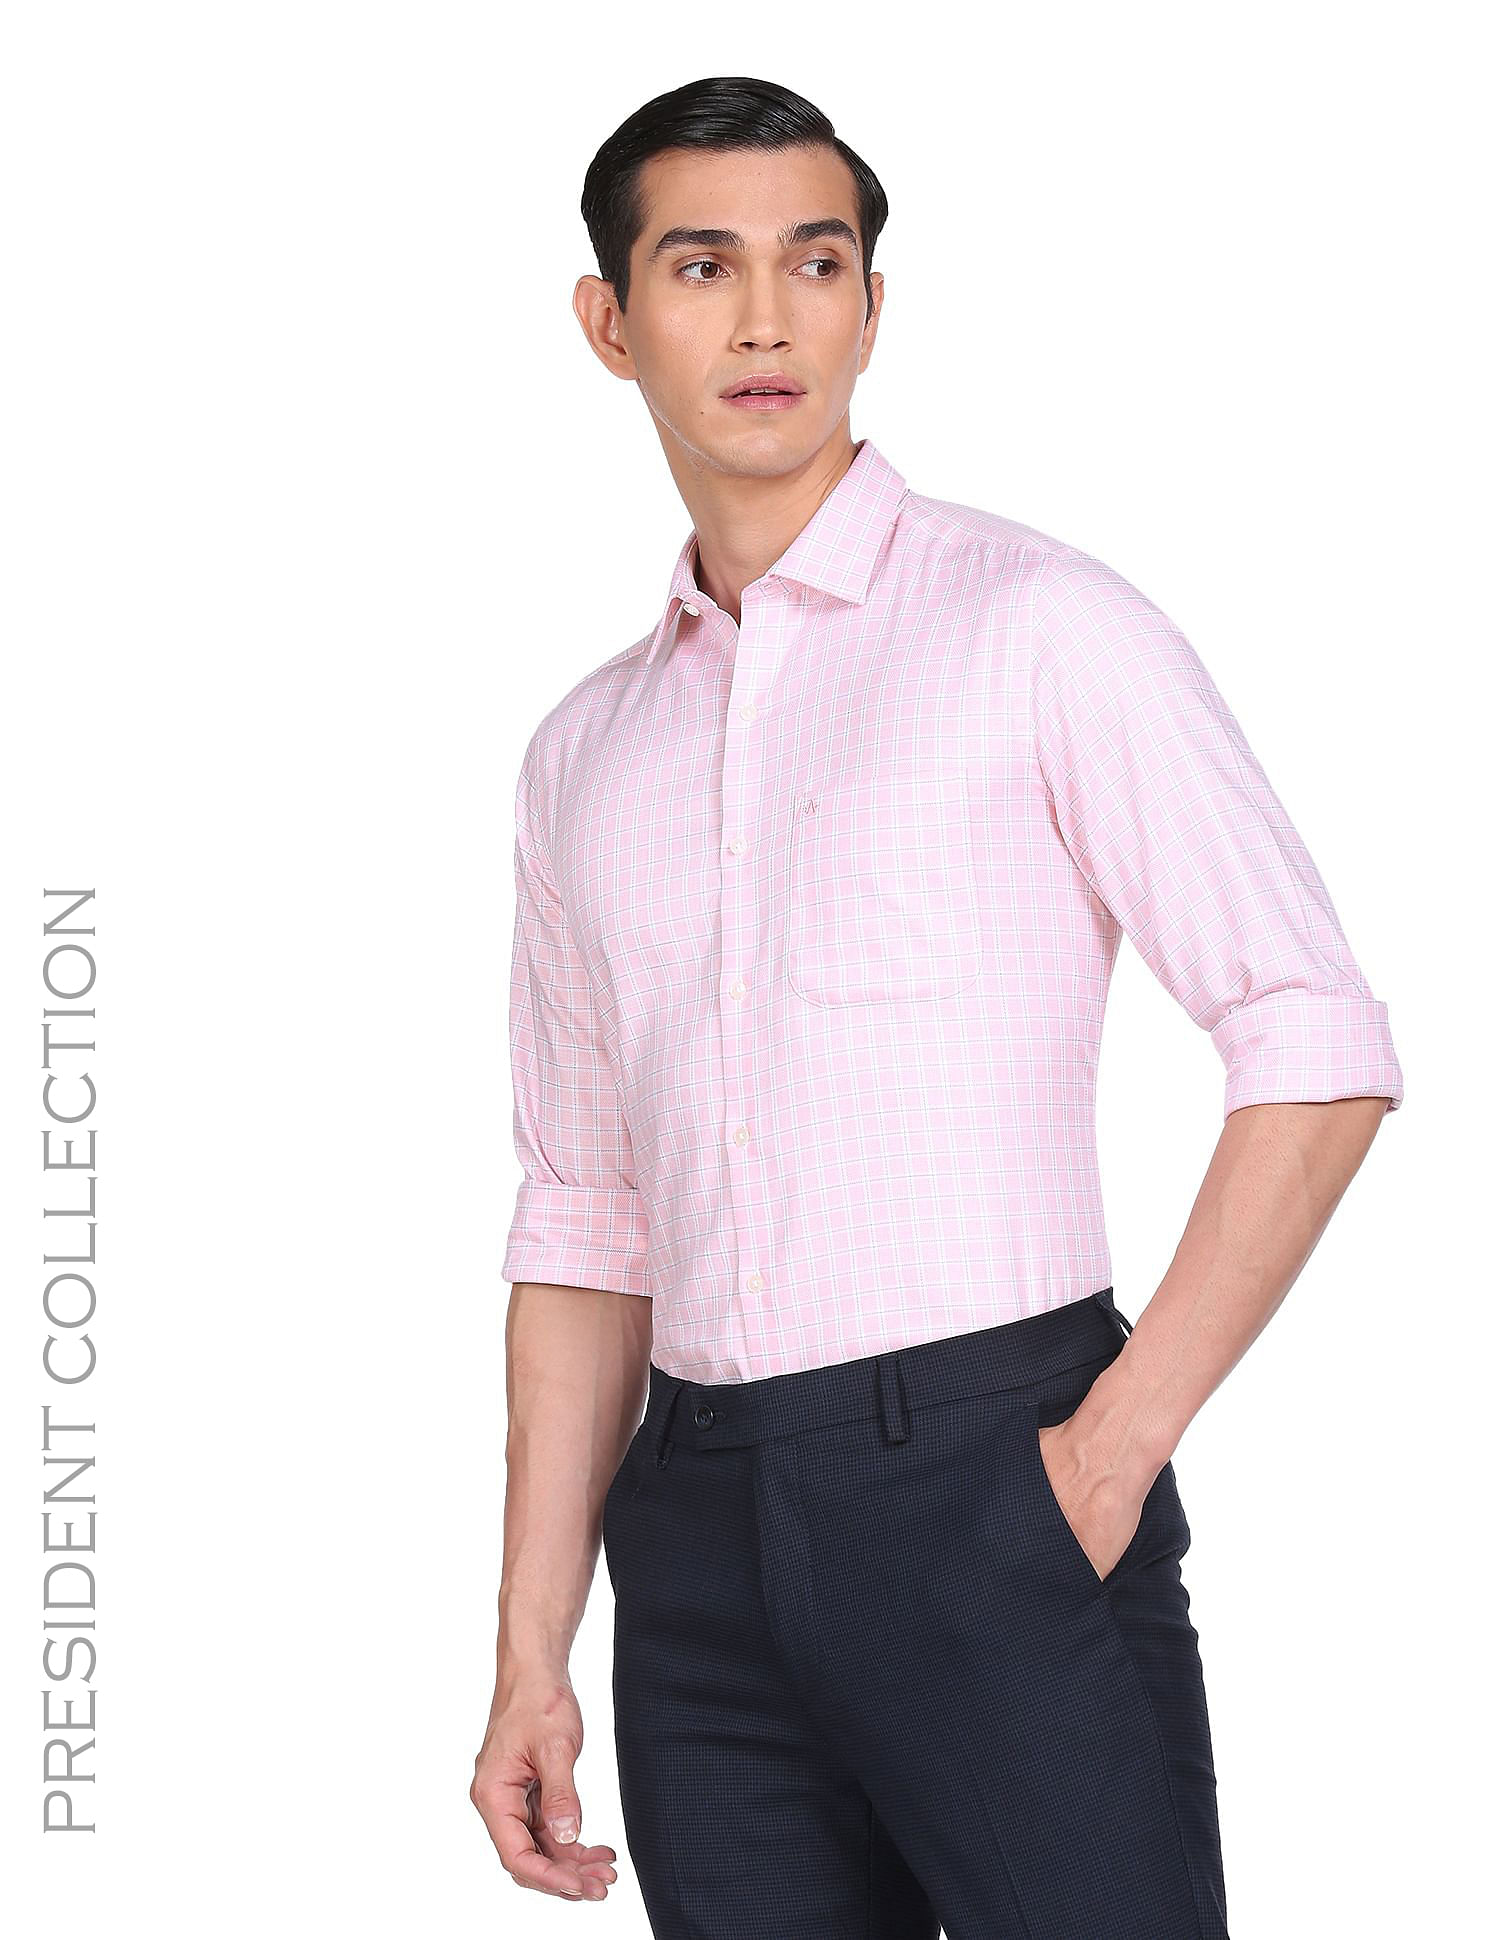 How to wear a pink shirt with style - Quora